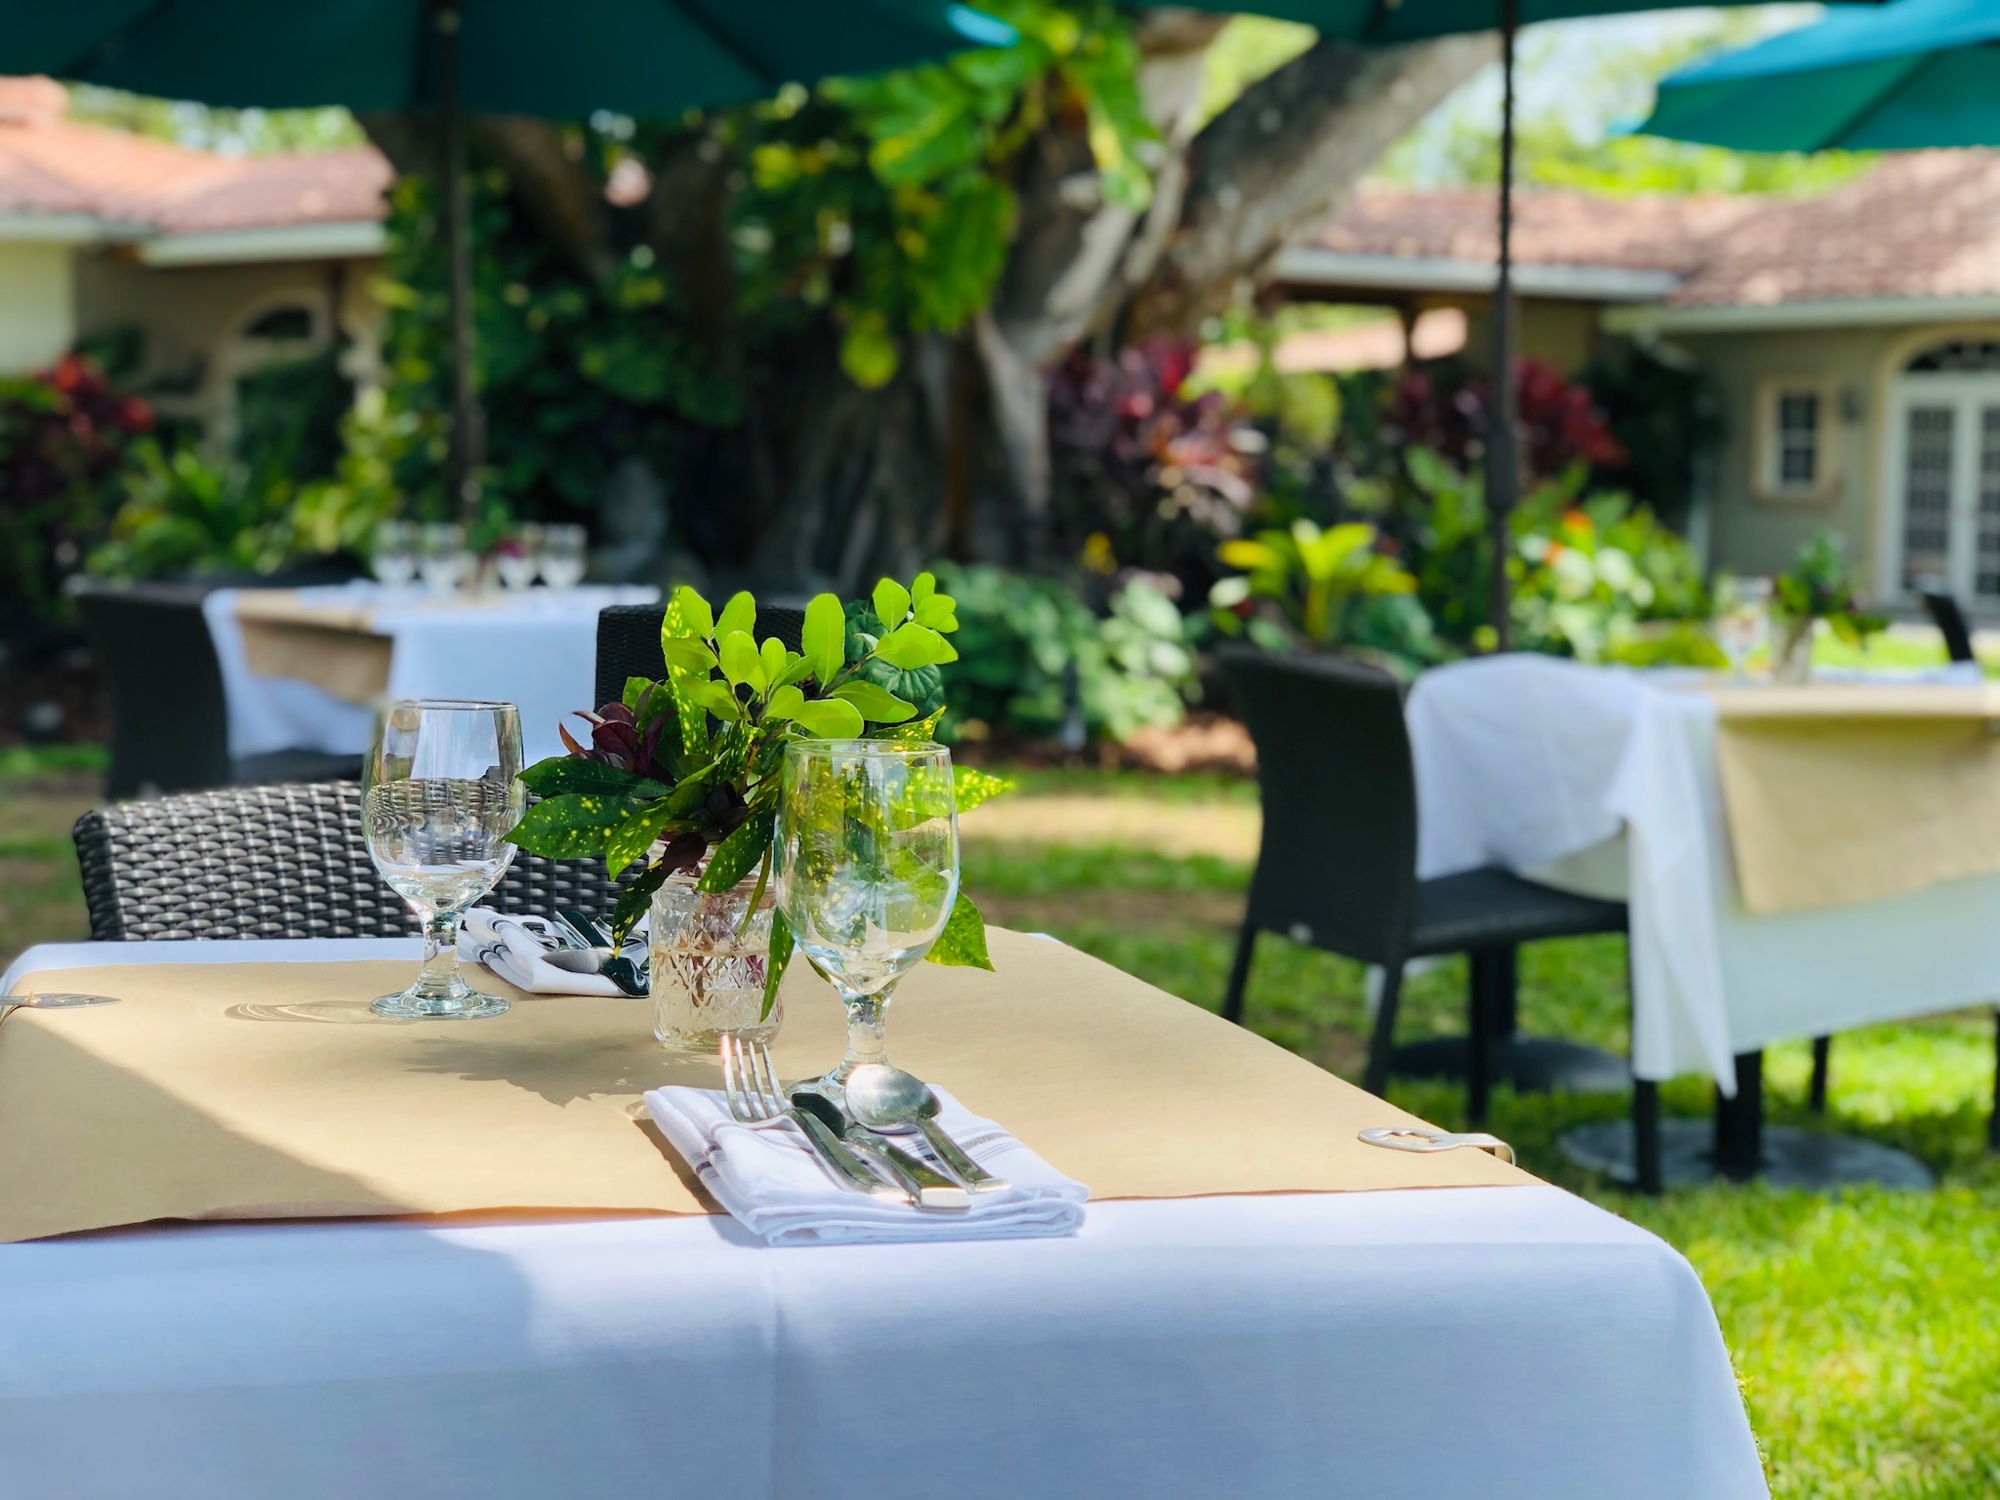 Courtesy/Chef David Robbins. In order to meet social distancing rules, the team at Harvest & Wisdom at Shangri-La Springs created outdoor seating with umbrellas on the lawn in addition to seating on the terrace.